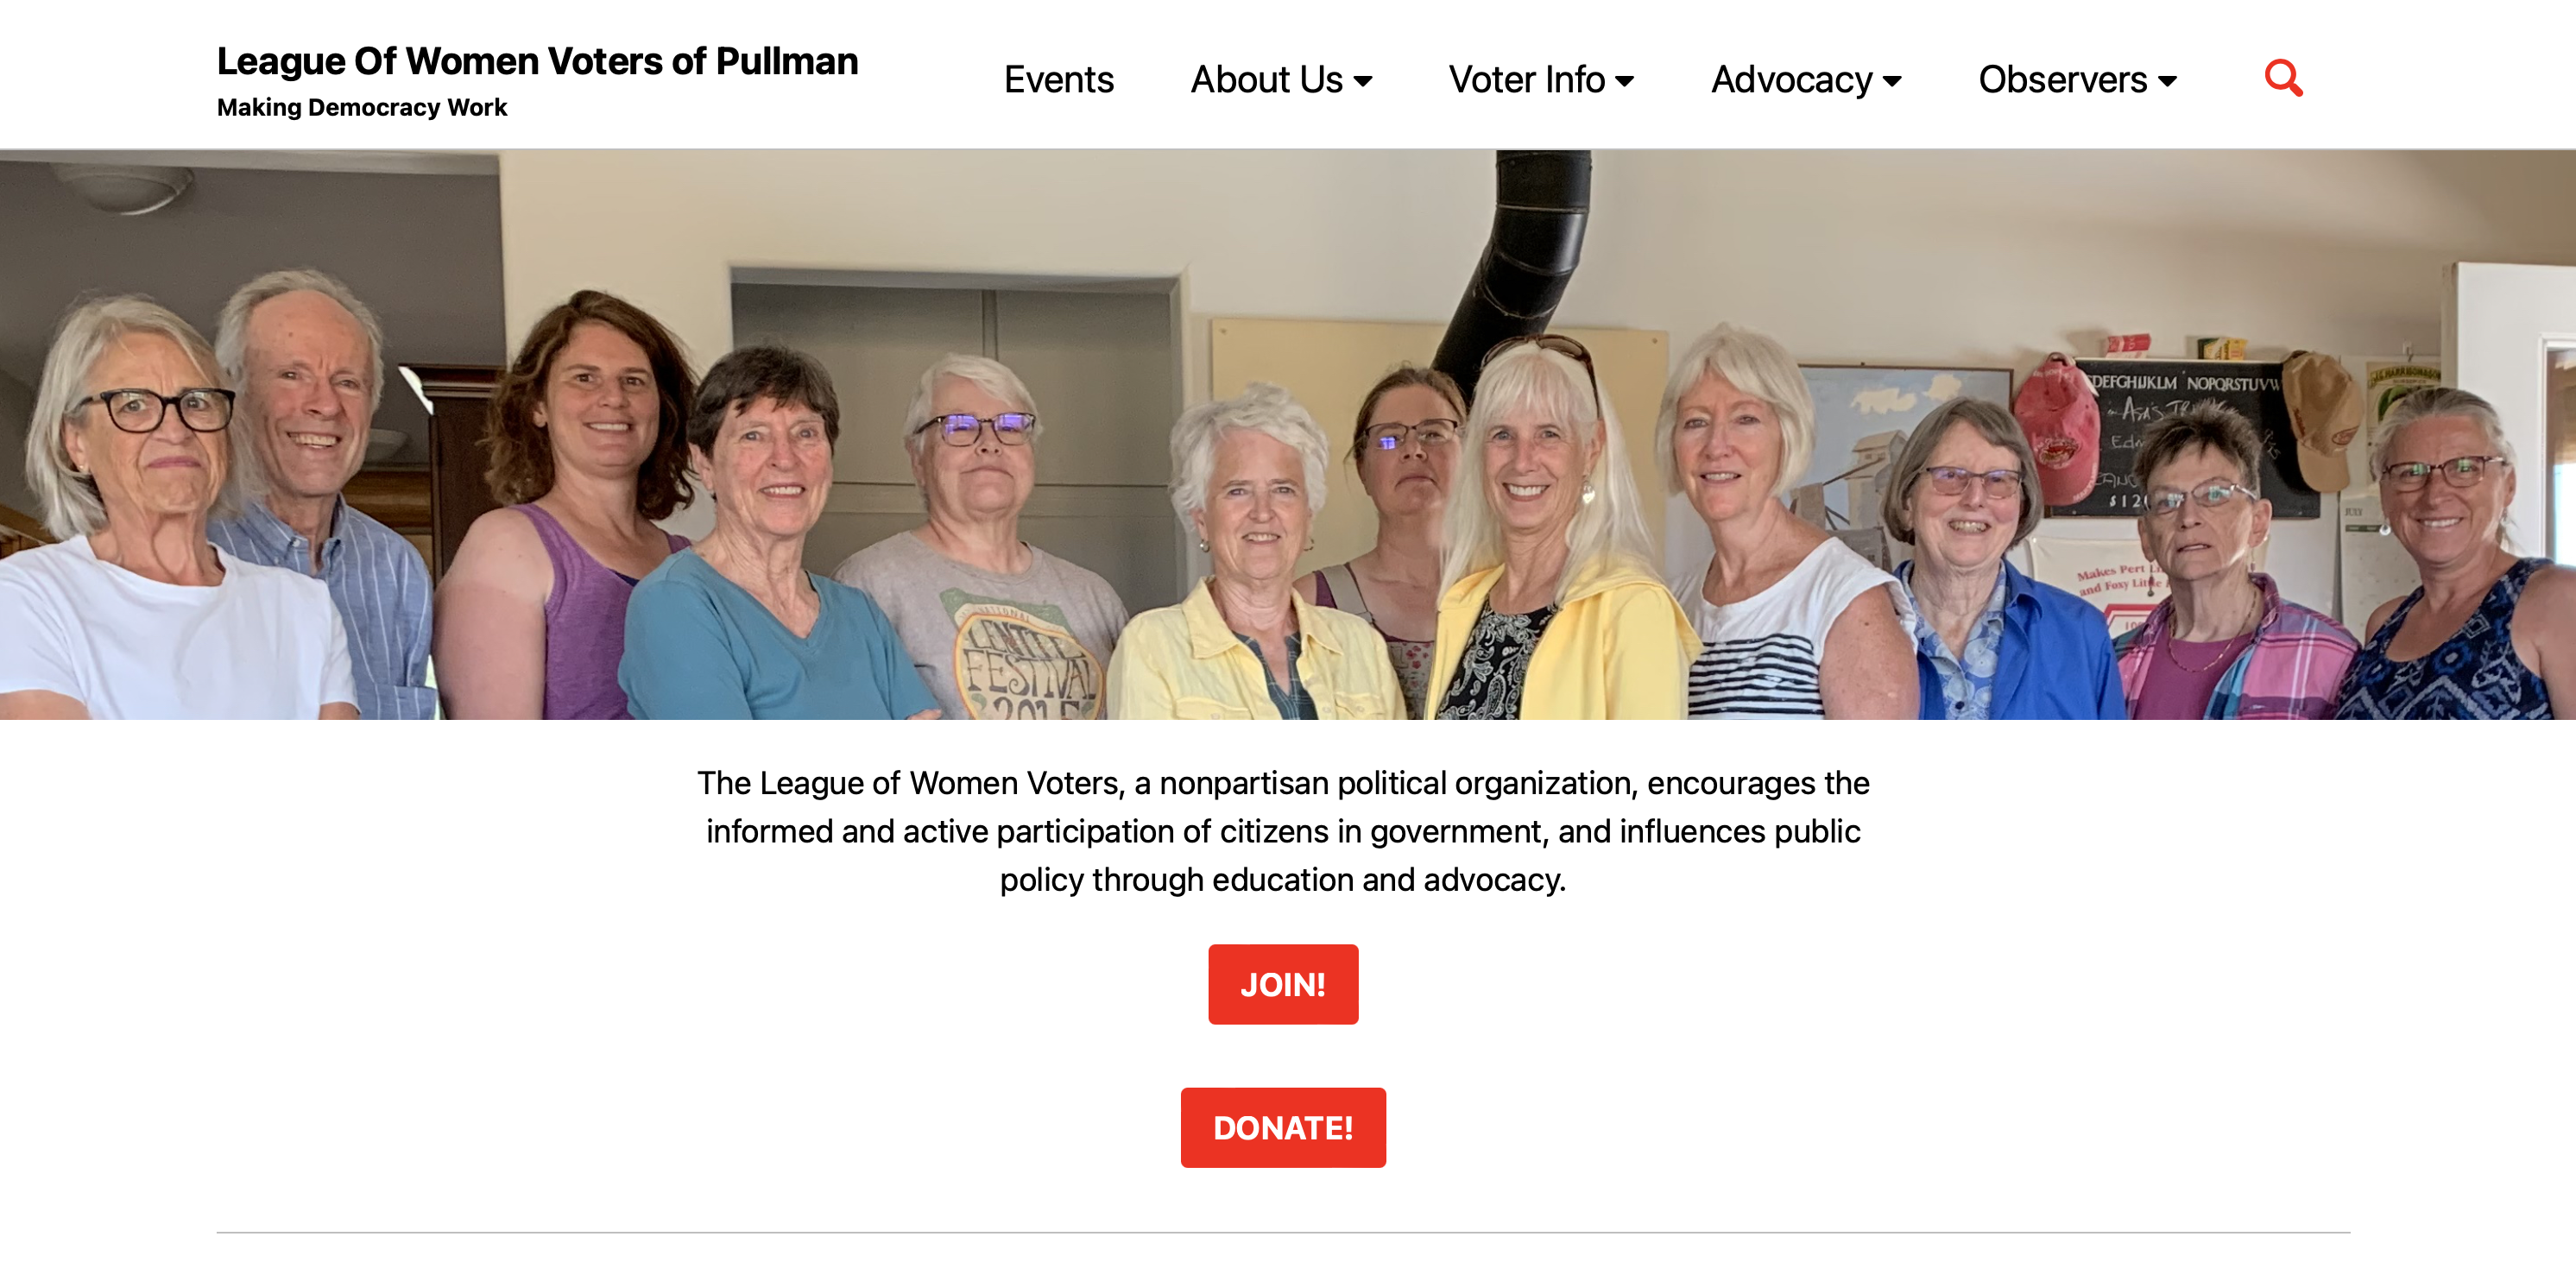 Image of current Pullman League of Women Voters website